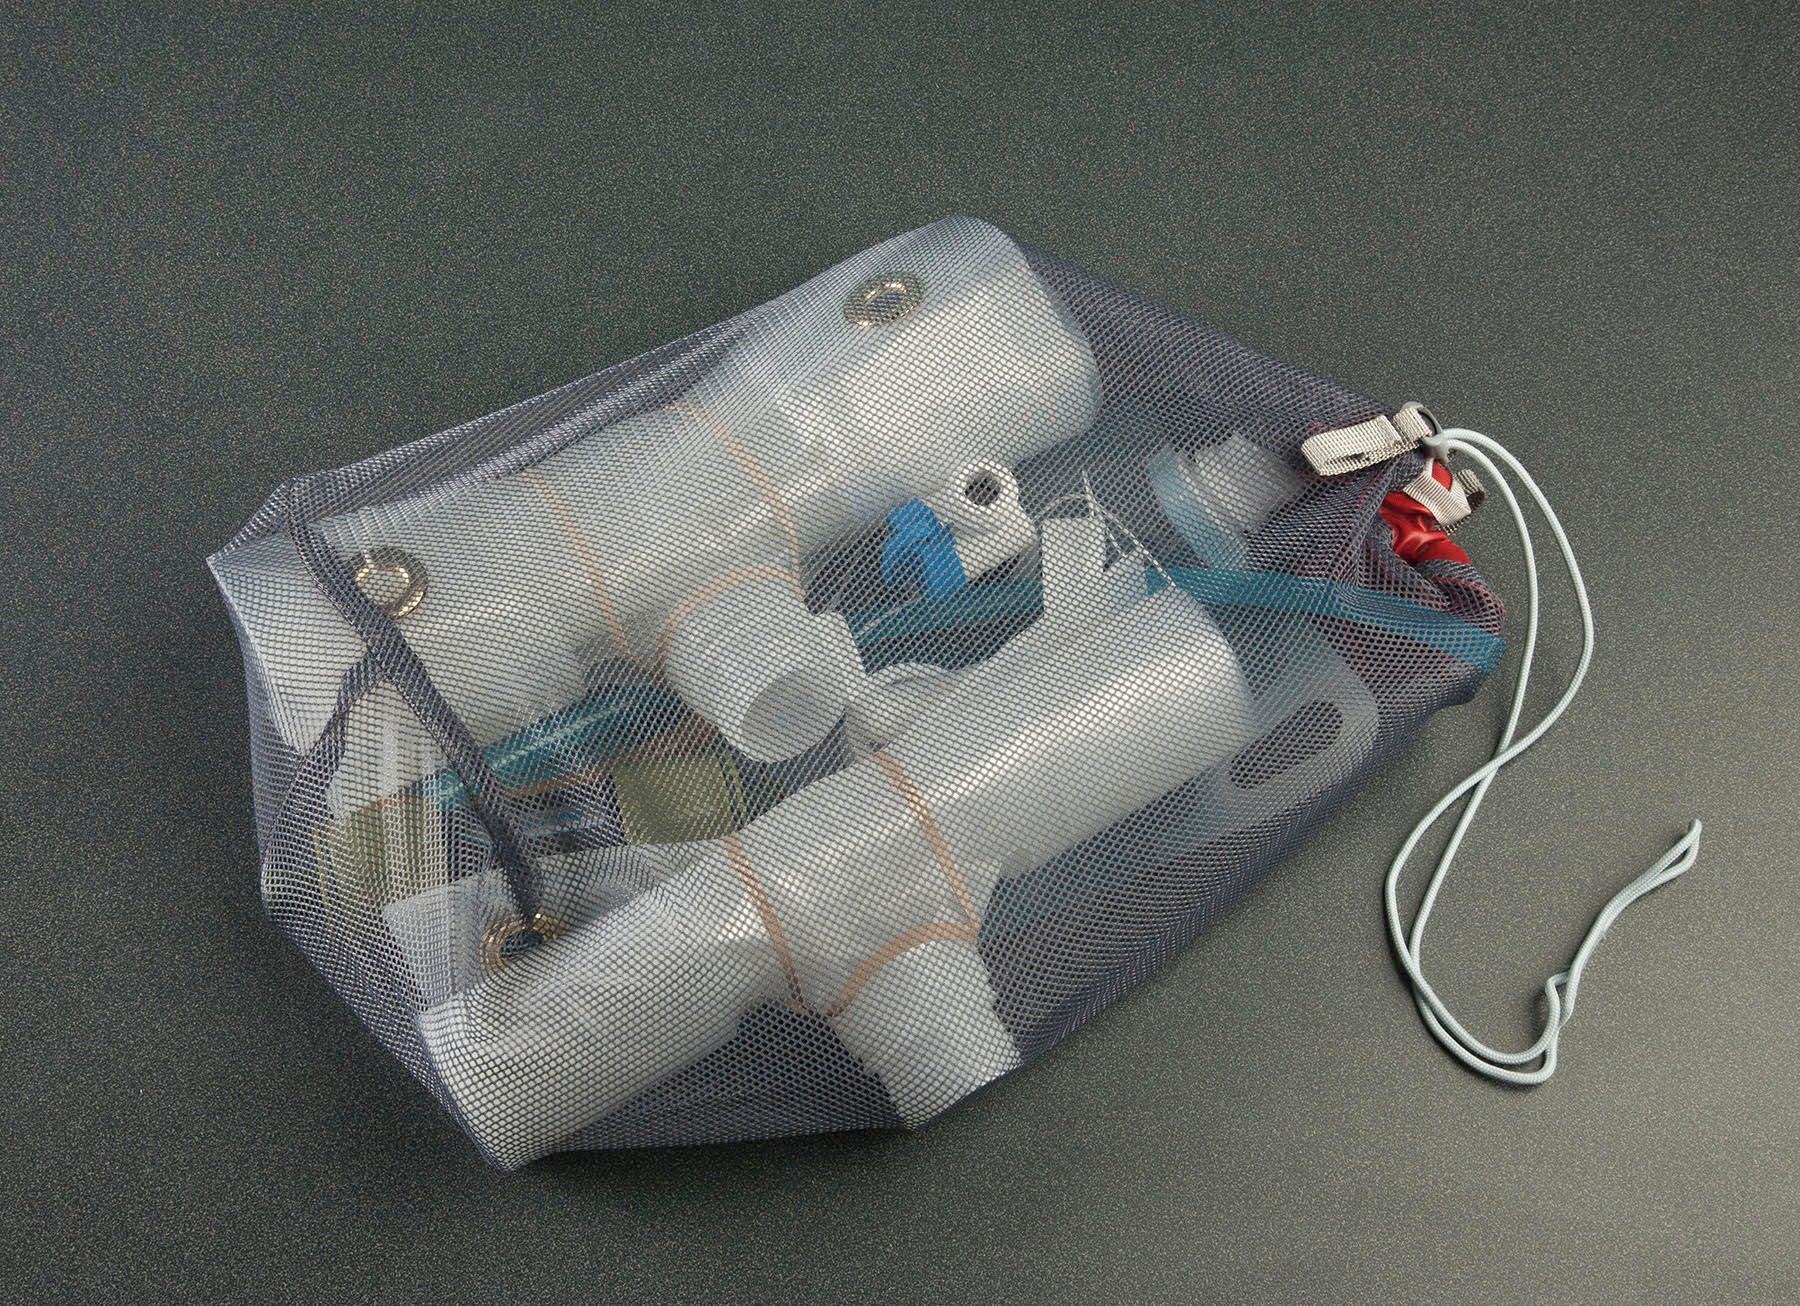 multiple parts of smart bottle's portable water filter contained in a mesh bag